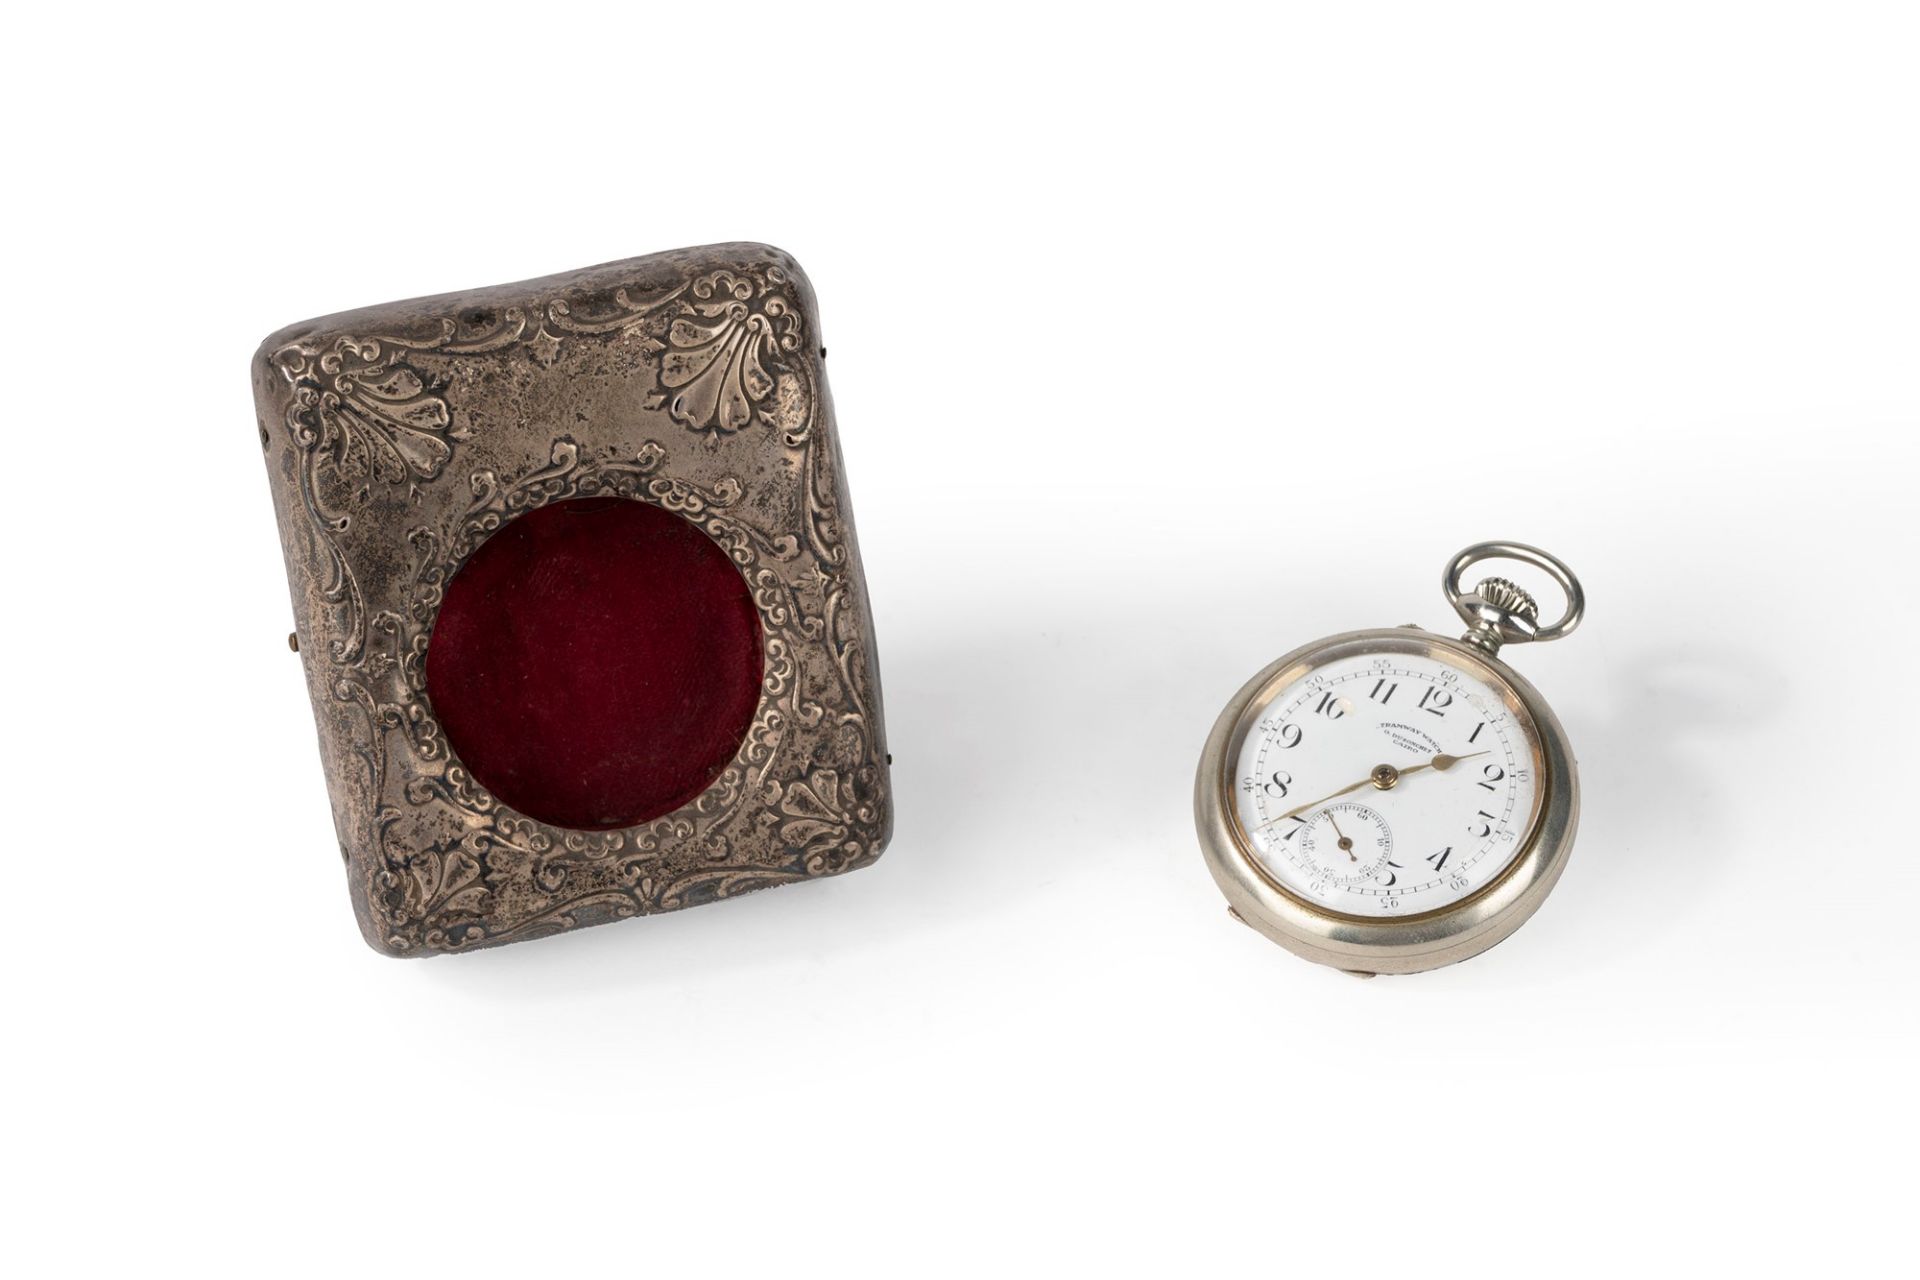 Metal pocket watch with leather and silver watch holder, early 20th century - Image 2 of 2